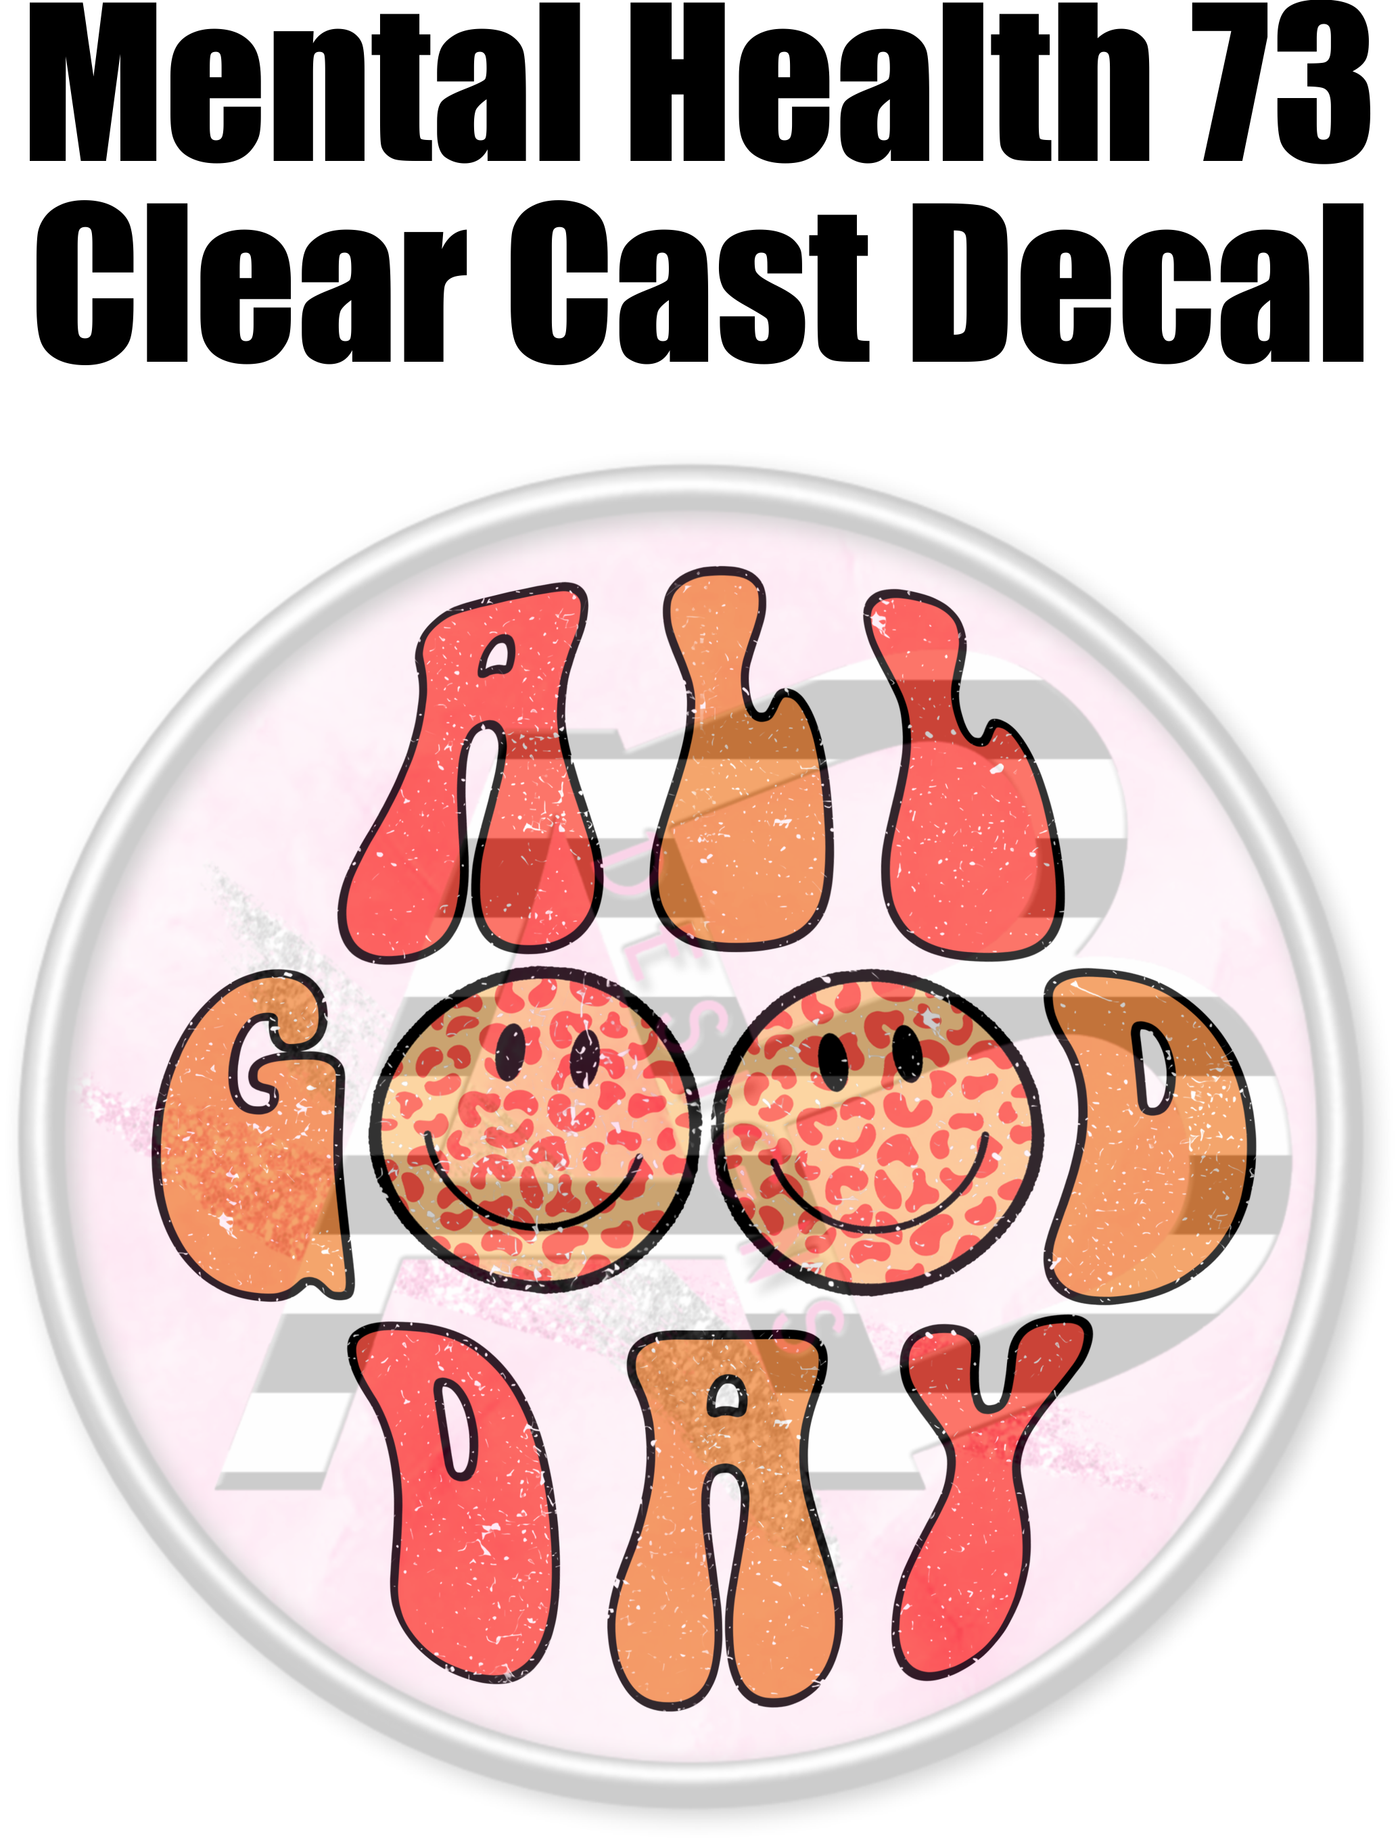 Mental Health 73 - Clear Cast Decal-457